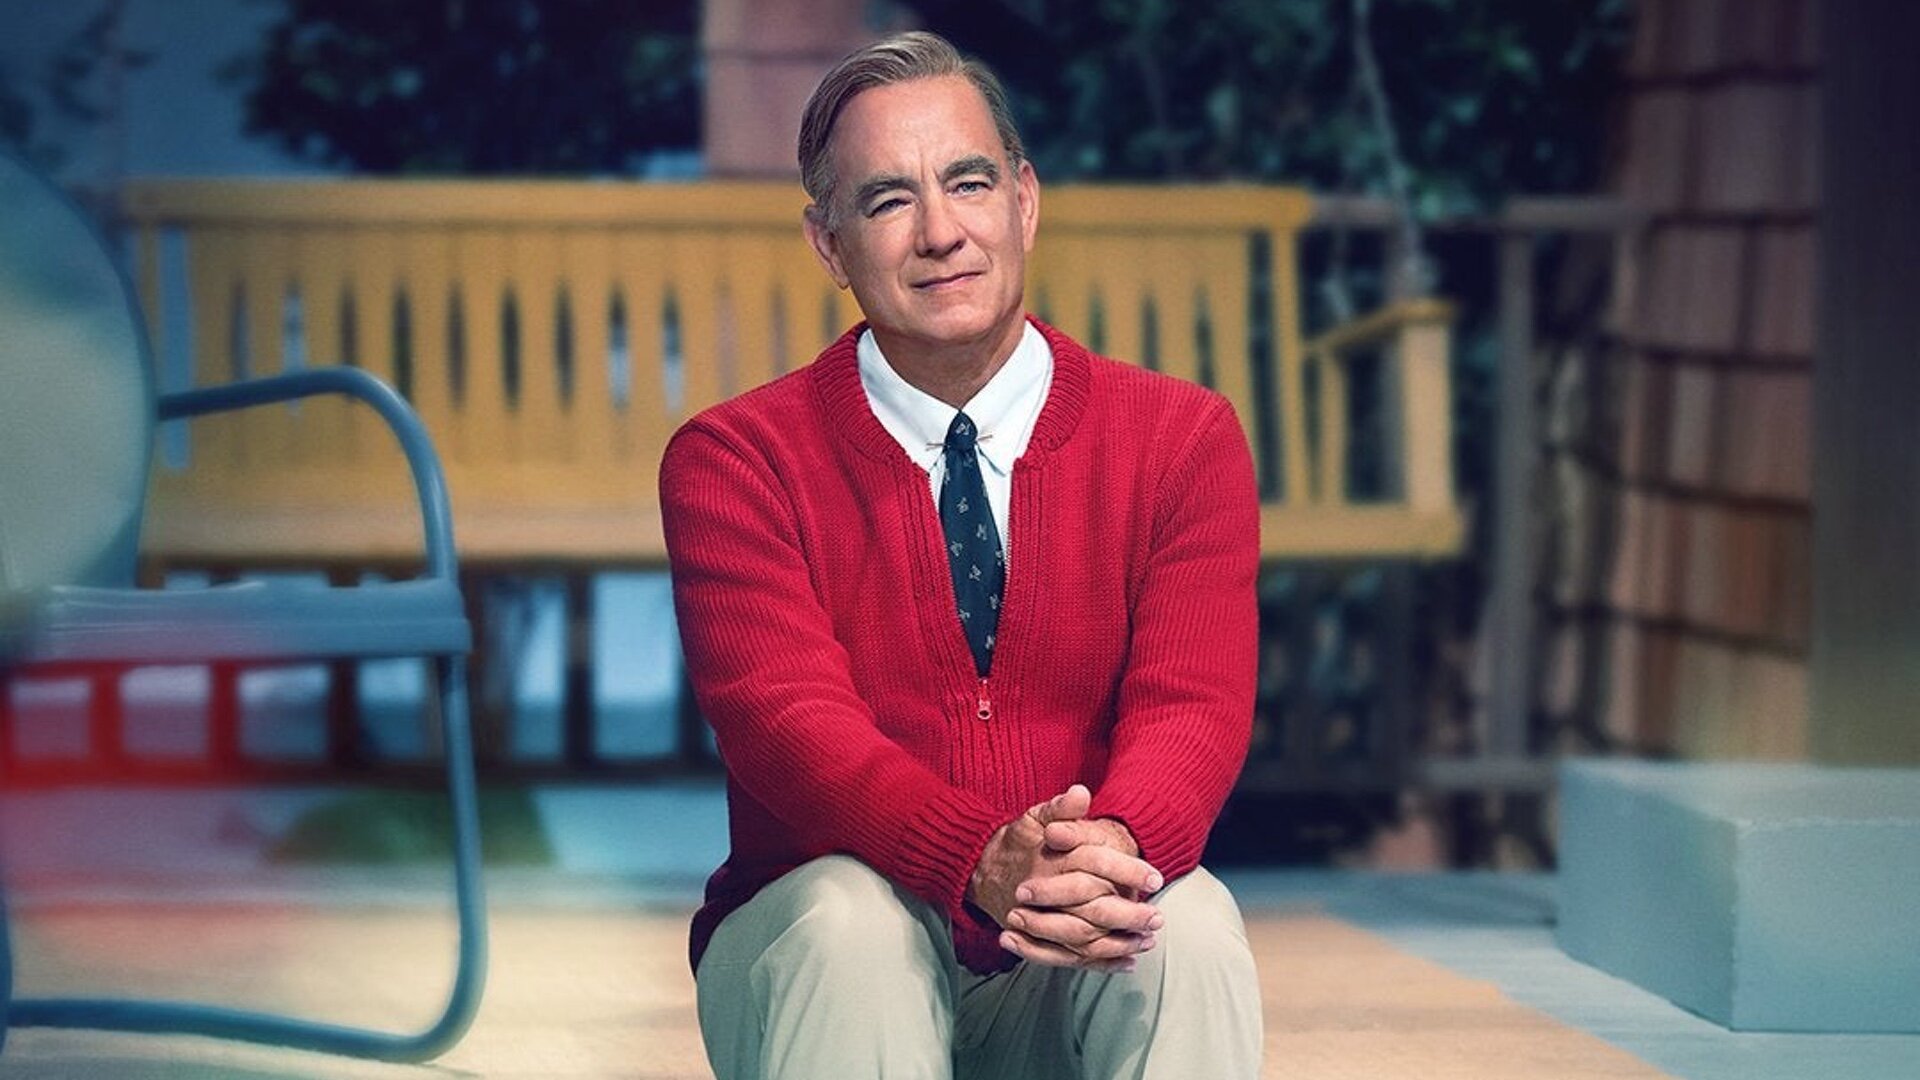 New Poster For A BEAUTIFUL DAY IN THE NEIGHBORHOOD Features Tom Hanks as Fred Rogers